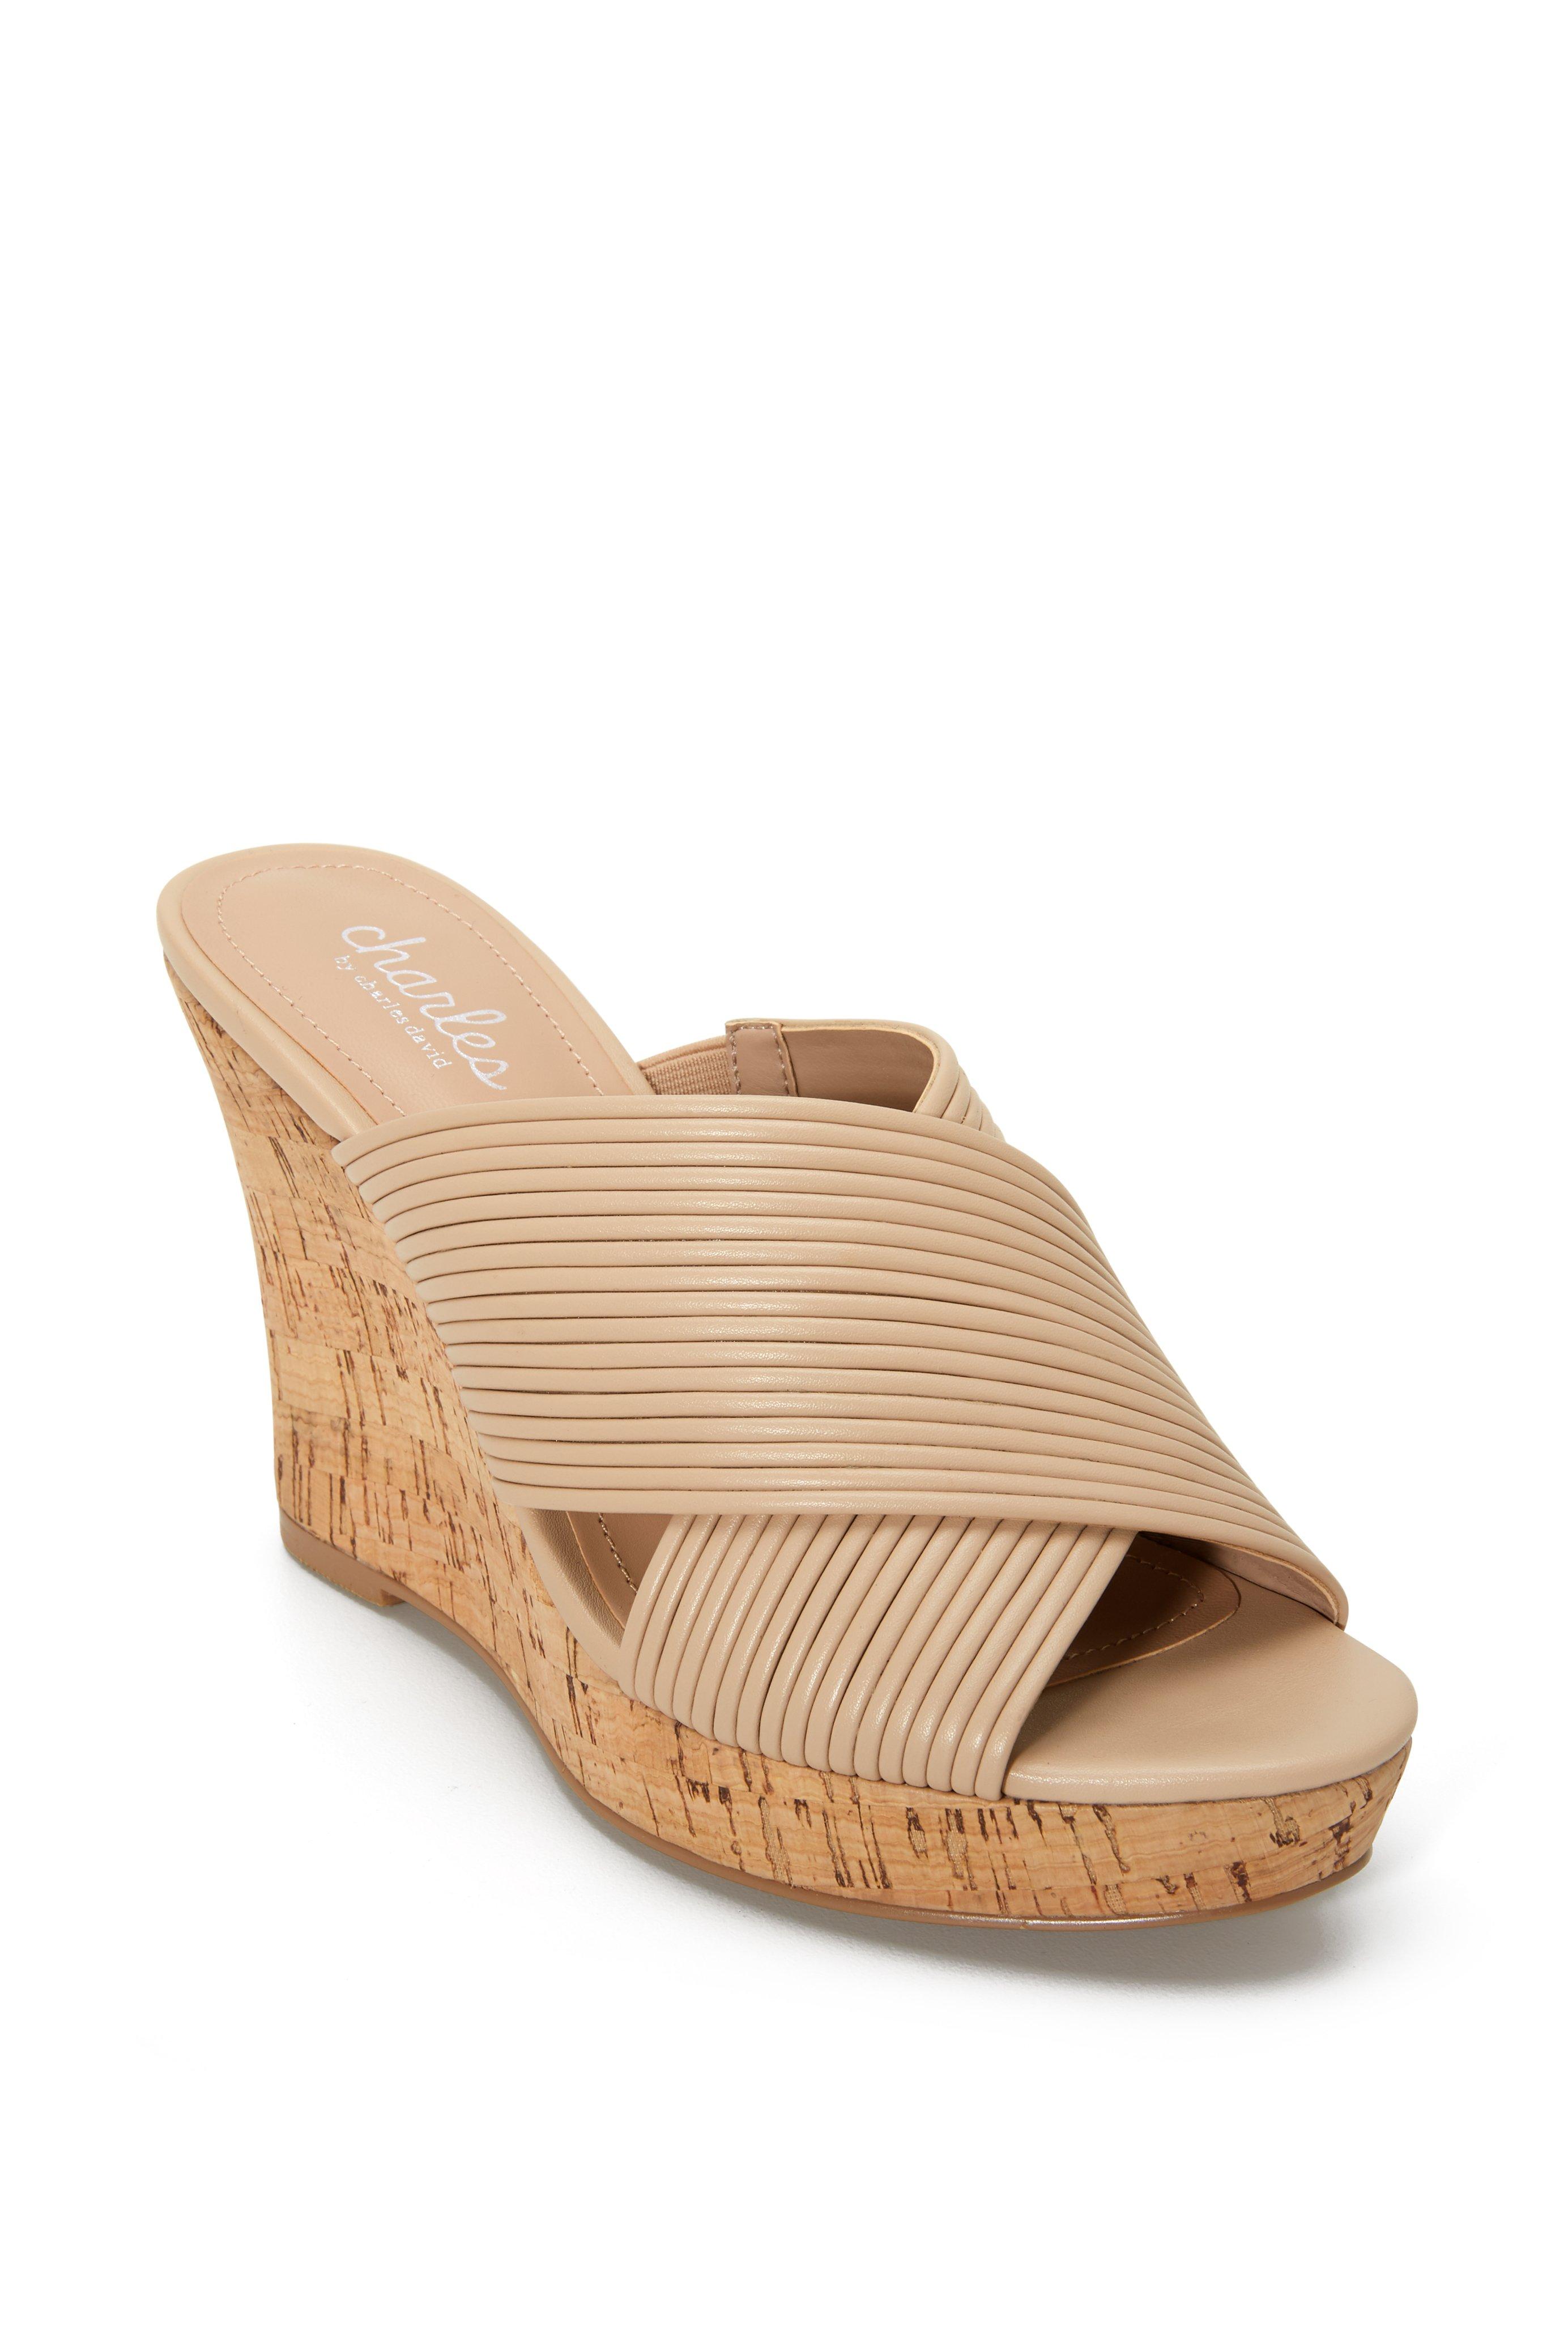 cork wedge shoes